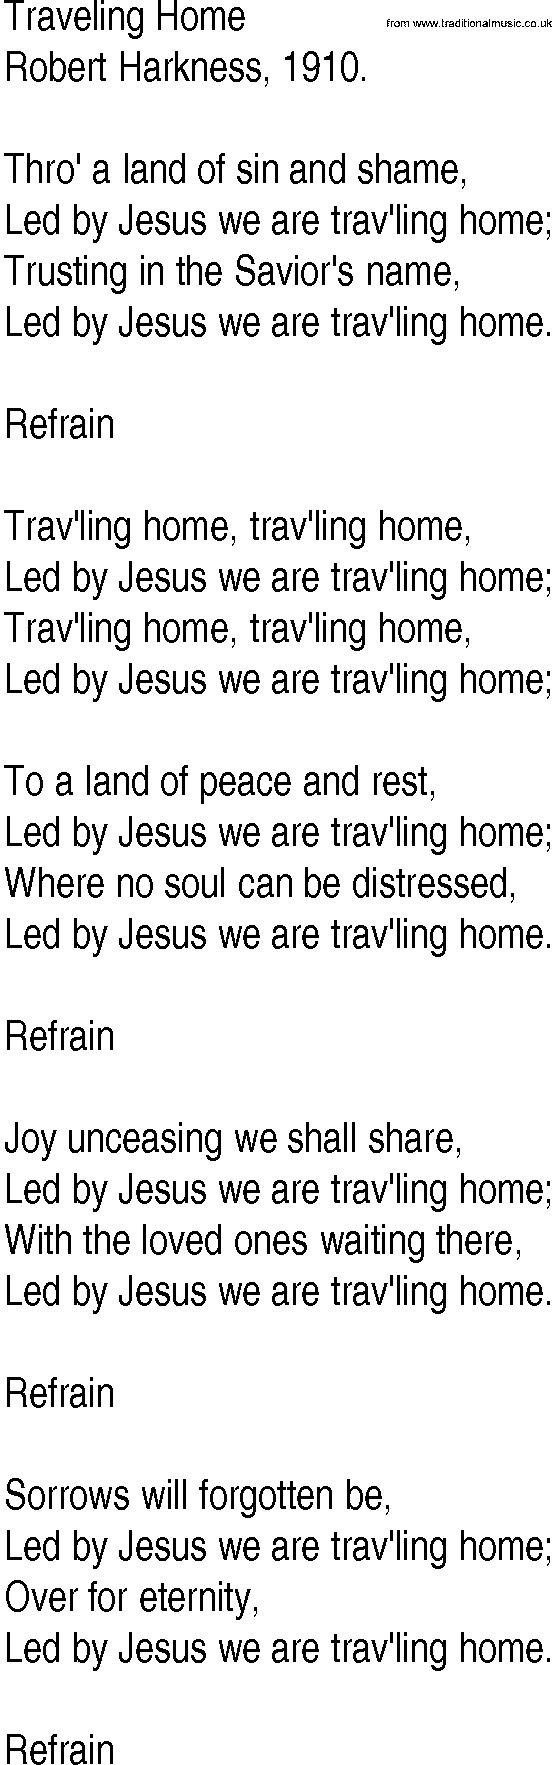 Hymn and Gospel Song: Traveling Home by Robert Harkness lyrics